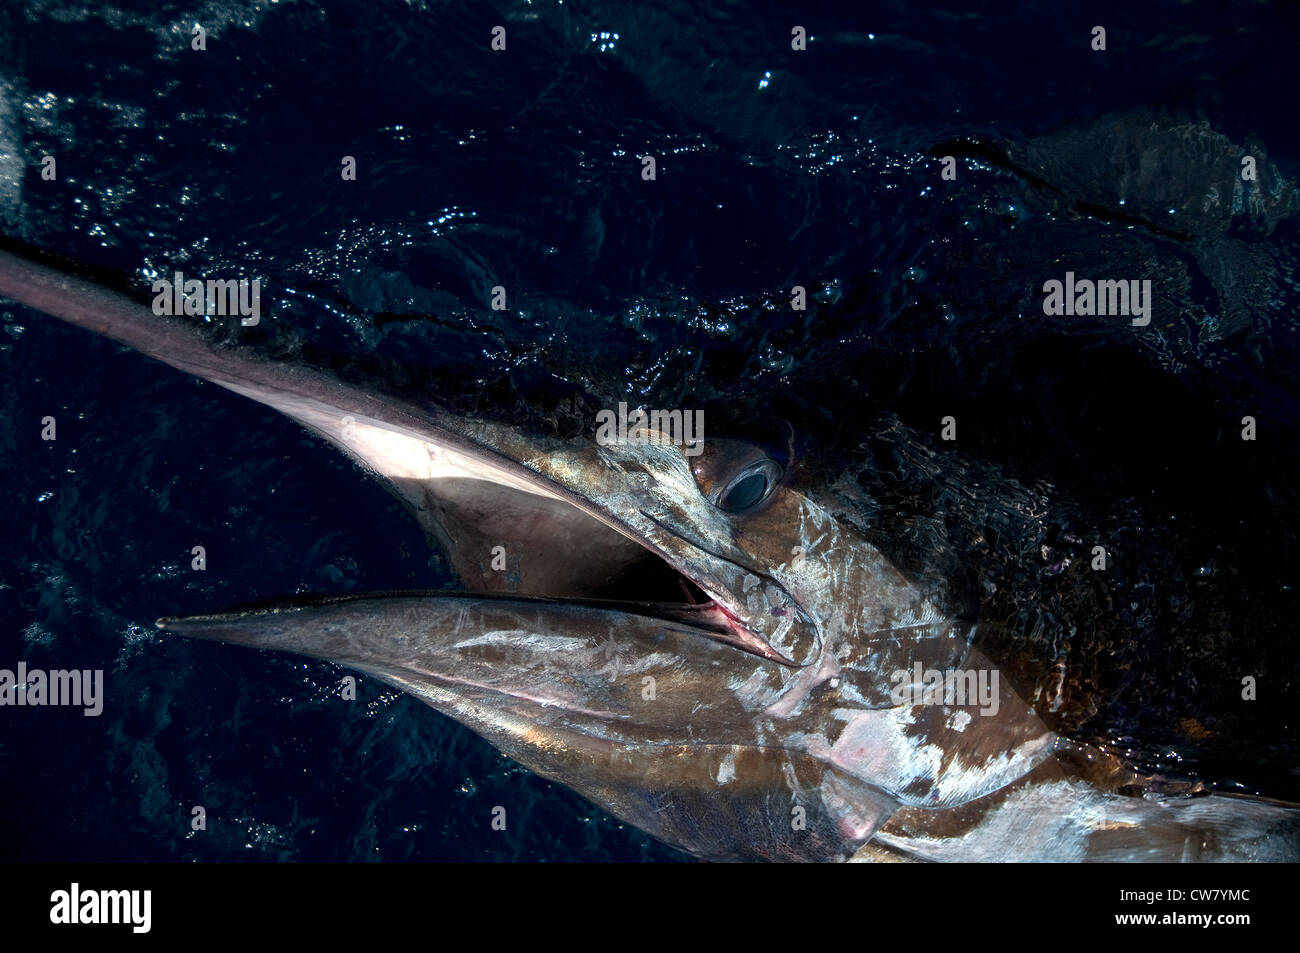 A 300 pound black marlin caught and released in the Pacific Ocean. Stock Photo